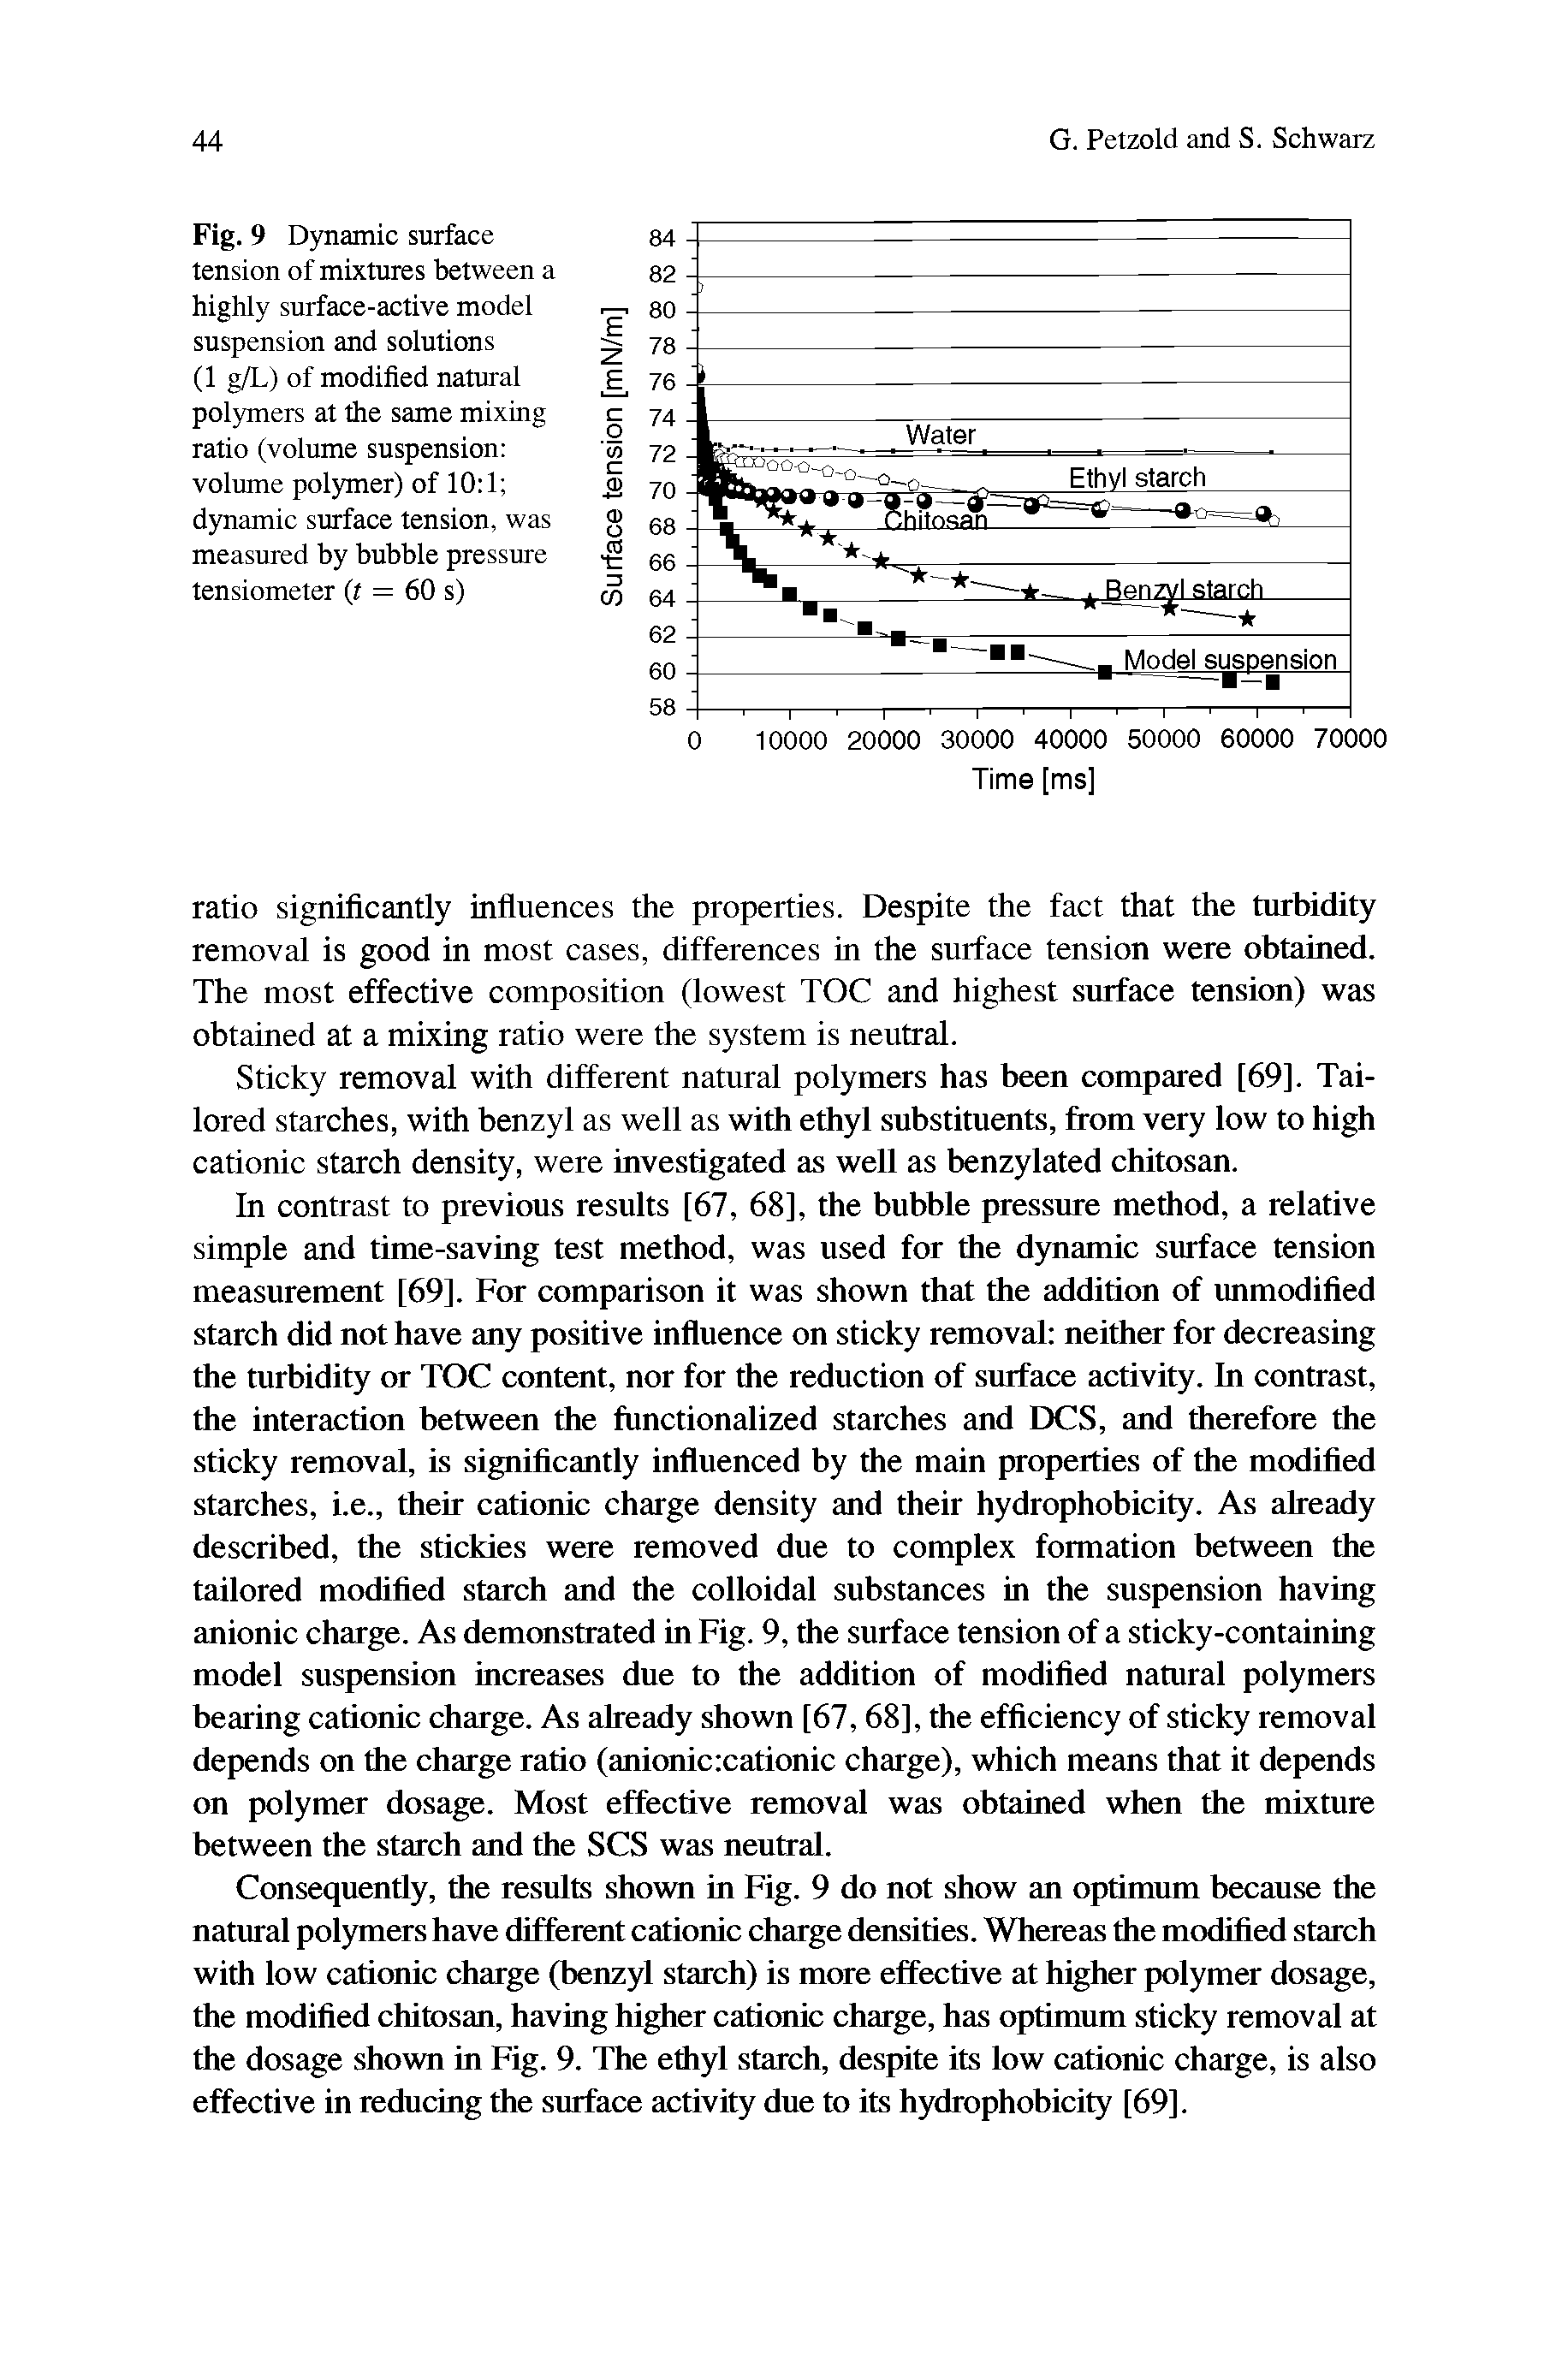 Fig. 9 Dynamic surface tension of mixtures between a highly surface-active model suspension and solutions (1 g/L) of modified natural polymers at the same mixing ratio (volume suspension volume polymer) of 10 1 dynamic surface tension, was measured by bubble pressure tensiometer (t = 60 s)...